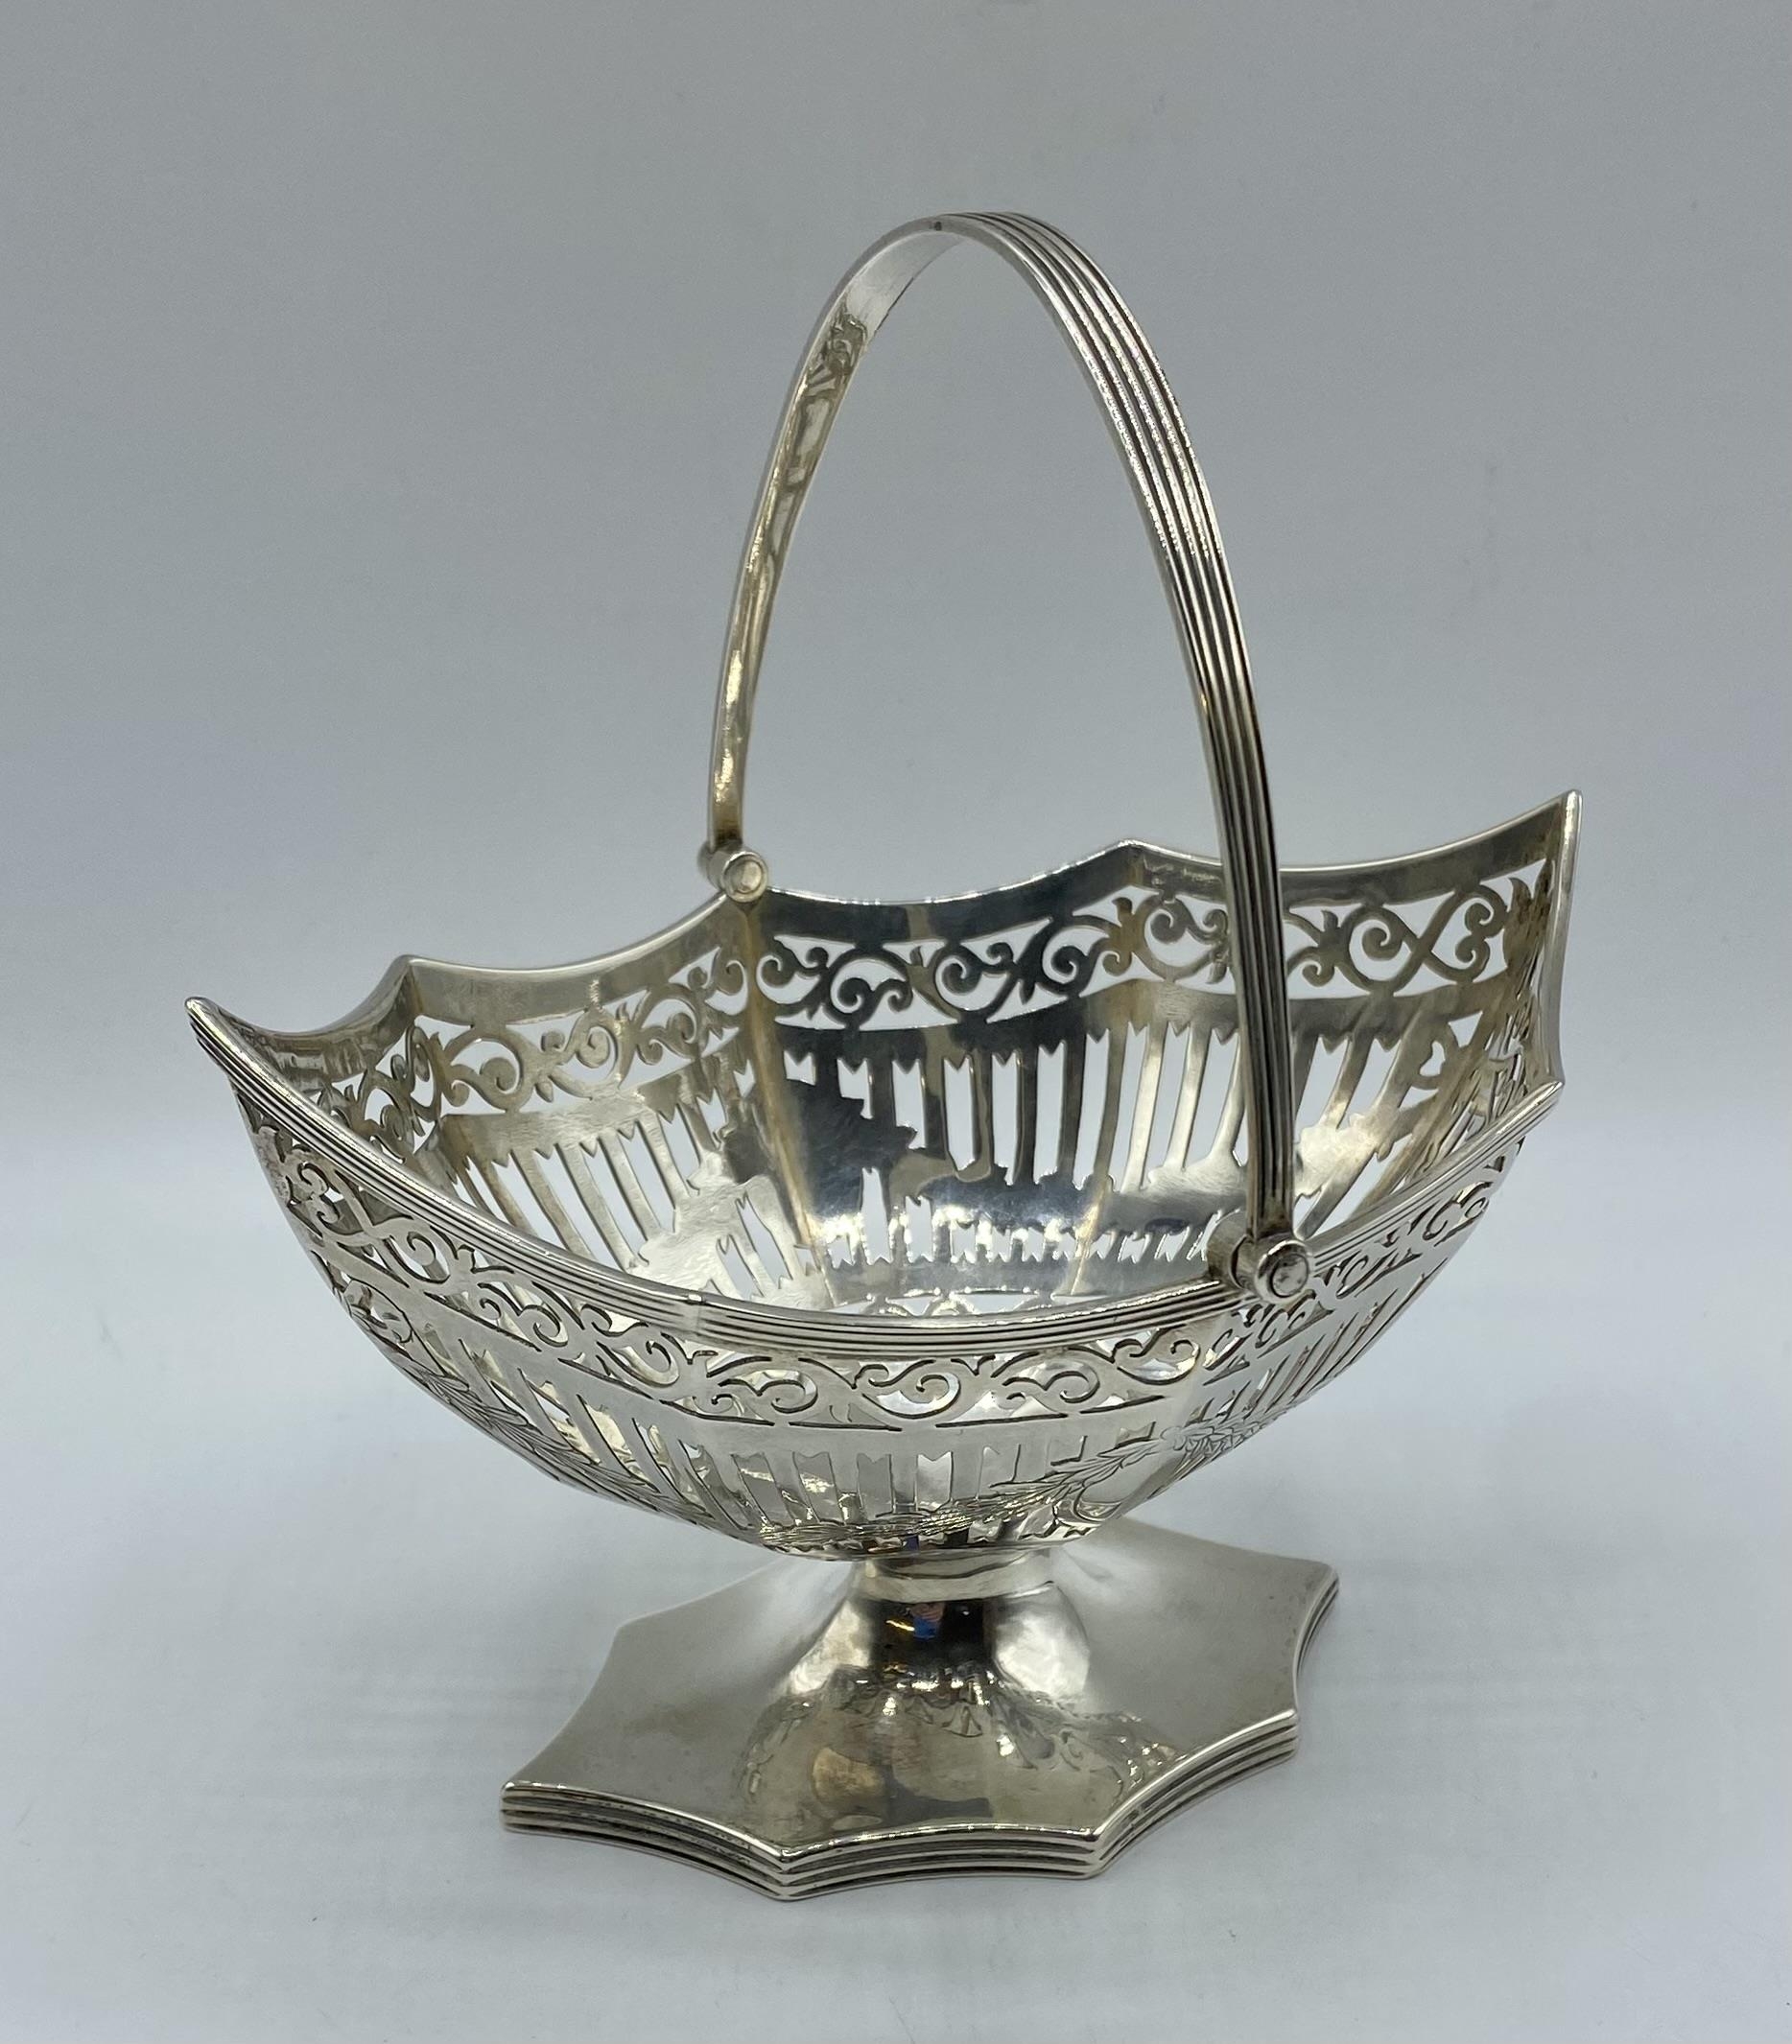 A sterling silver octagonal pierced Bonbon dish with swing handle, by Haseler and Bill, London